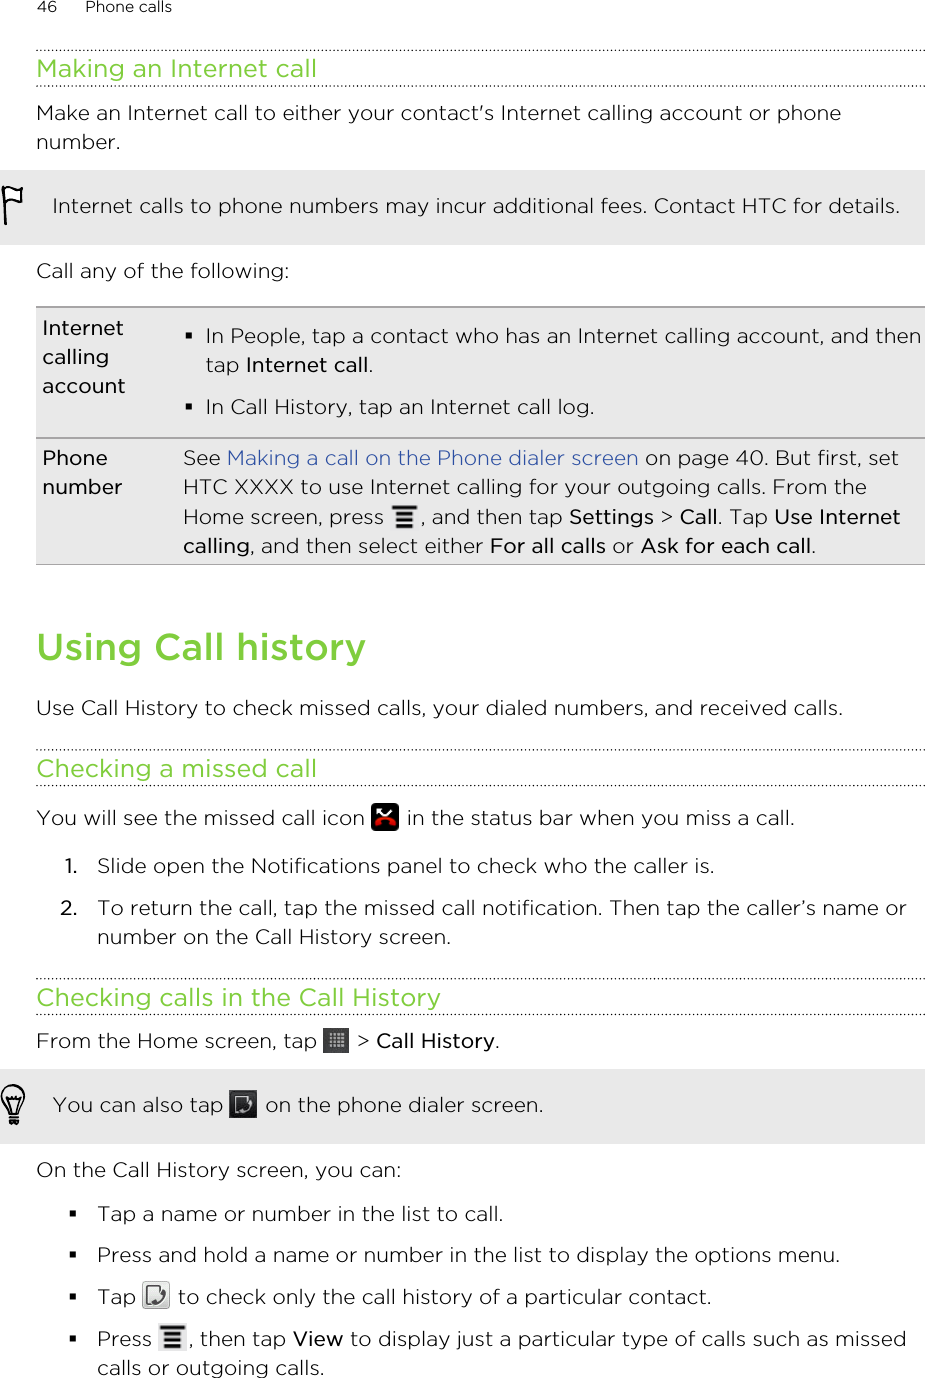 Making an Internet callMake an Internet call to either your contact&apos;s Internet calling account or phonenumber.Internet calls to phone numbers may incur additional fees. Contact HTC for details.Call any of the following:Internetcallingaccount§In People, tap a contact who has an Internet calling account, and thentap Internet call.§In Call History, tap an Internet call log.PhonenumberSee Making a call on the Phone dialer screen on page 40. But first, setHTC XXXX to use Internet calling for your outgoing calls. From theHome screen, press  , and then tap Settings &gt; Call. Tap Use Internetcalling, and then select either For all calls or Ask for each call.Using Call historyUse Call History to check missed calls, your dialed numbers, and received calls.Checking a missed callYou will see the missed call icon   in the status bar when you miss a call.1. Slide open the Notifications panel to check who the caller is.2. To return the call, tap the missed call notification. Then tap the caller’s name ornumber on the Call History screen.Checking calls in the Call HistoryFrom the Home screen, tap   &gt; Call History. You can also tap   on the phone dialer screen.On the Call History screen, you can:§Tap a name or number in the list to call.§Press and hold a name or number in the list to display the options menu.§Tap   to check only the call history of a particular contact.§Press  , then tap View to display just a particular type of calls such as missedcalls or outgoing calls.46 Phone calls